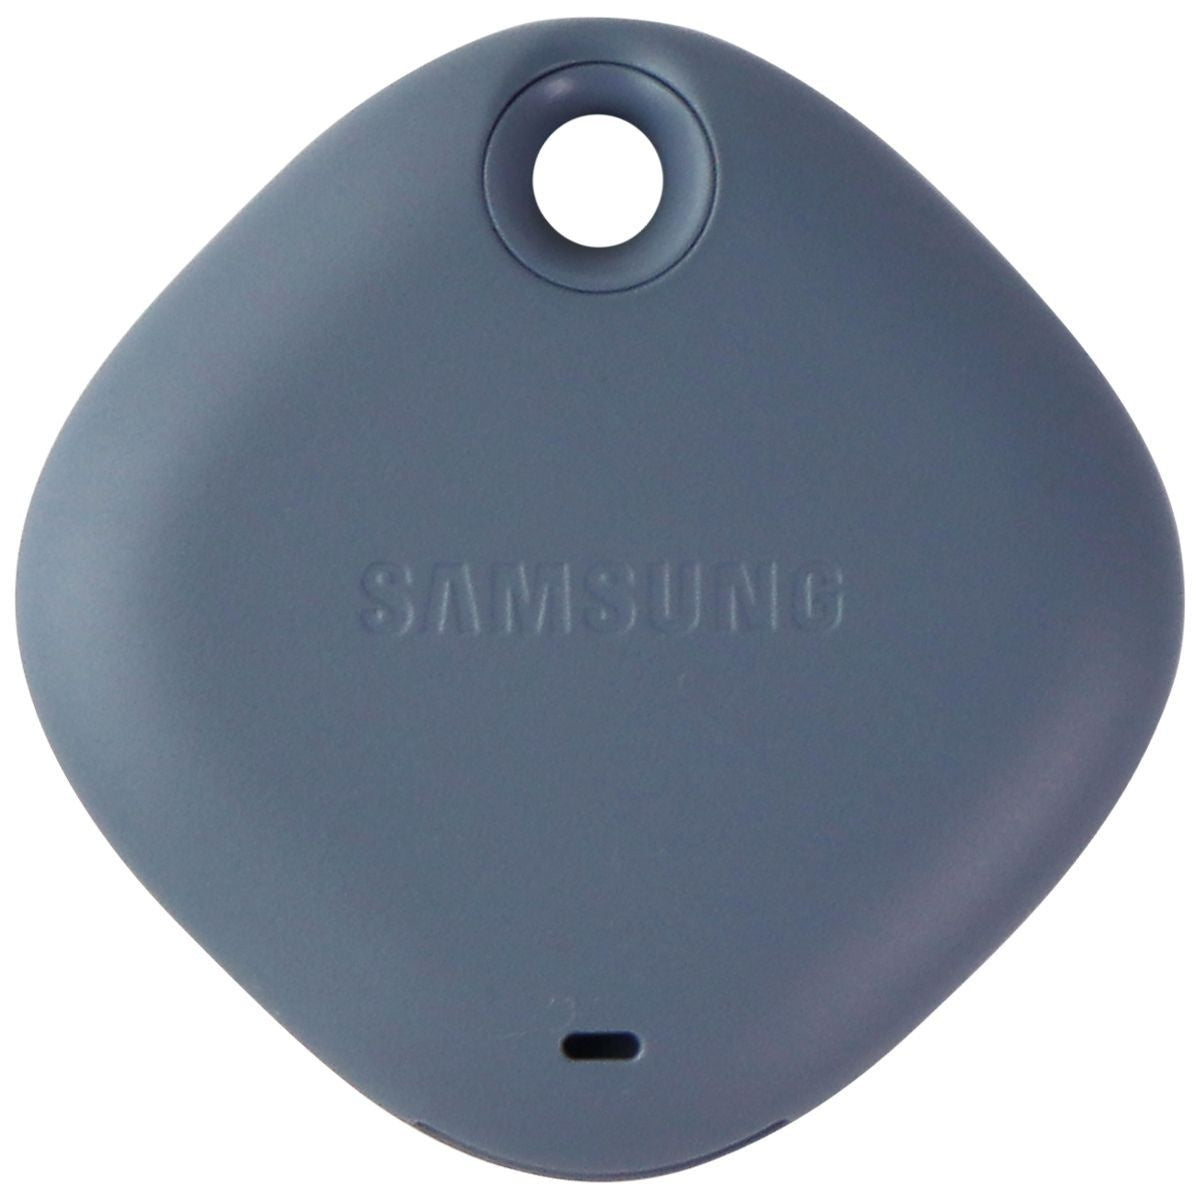 Samsung Galaxy SmartTag+ Plus, 1 Pack, Smart Home Accessory Locator - Blue GPS Accessories & Tracking - Tracking Devices Samsung    - Simple Cell Bulk Wholesale Pricing - USA Seller